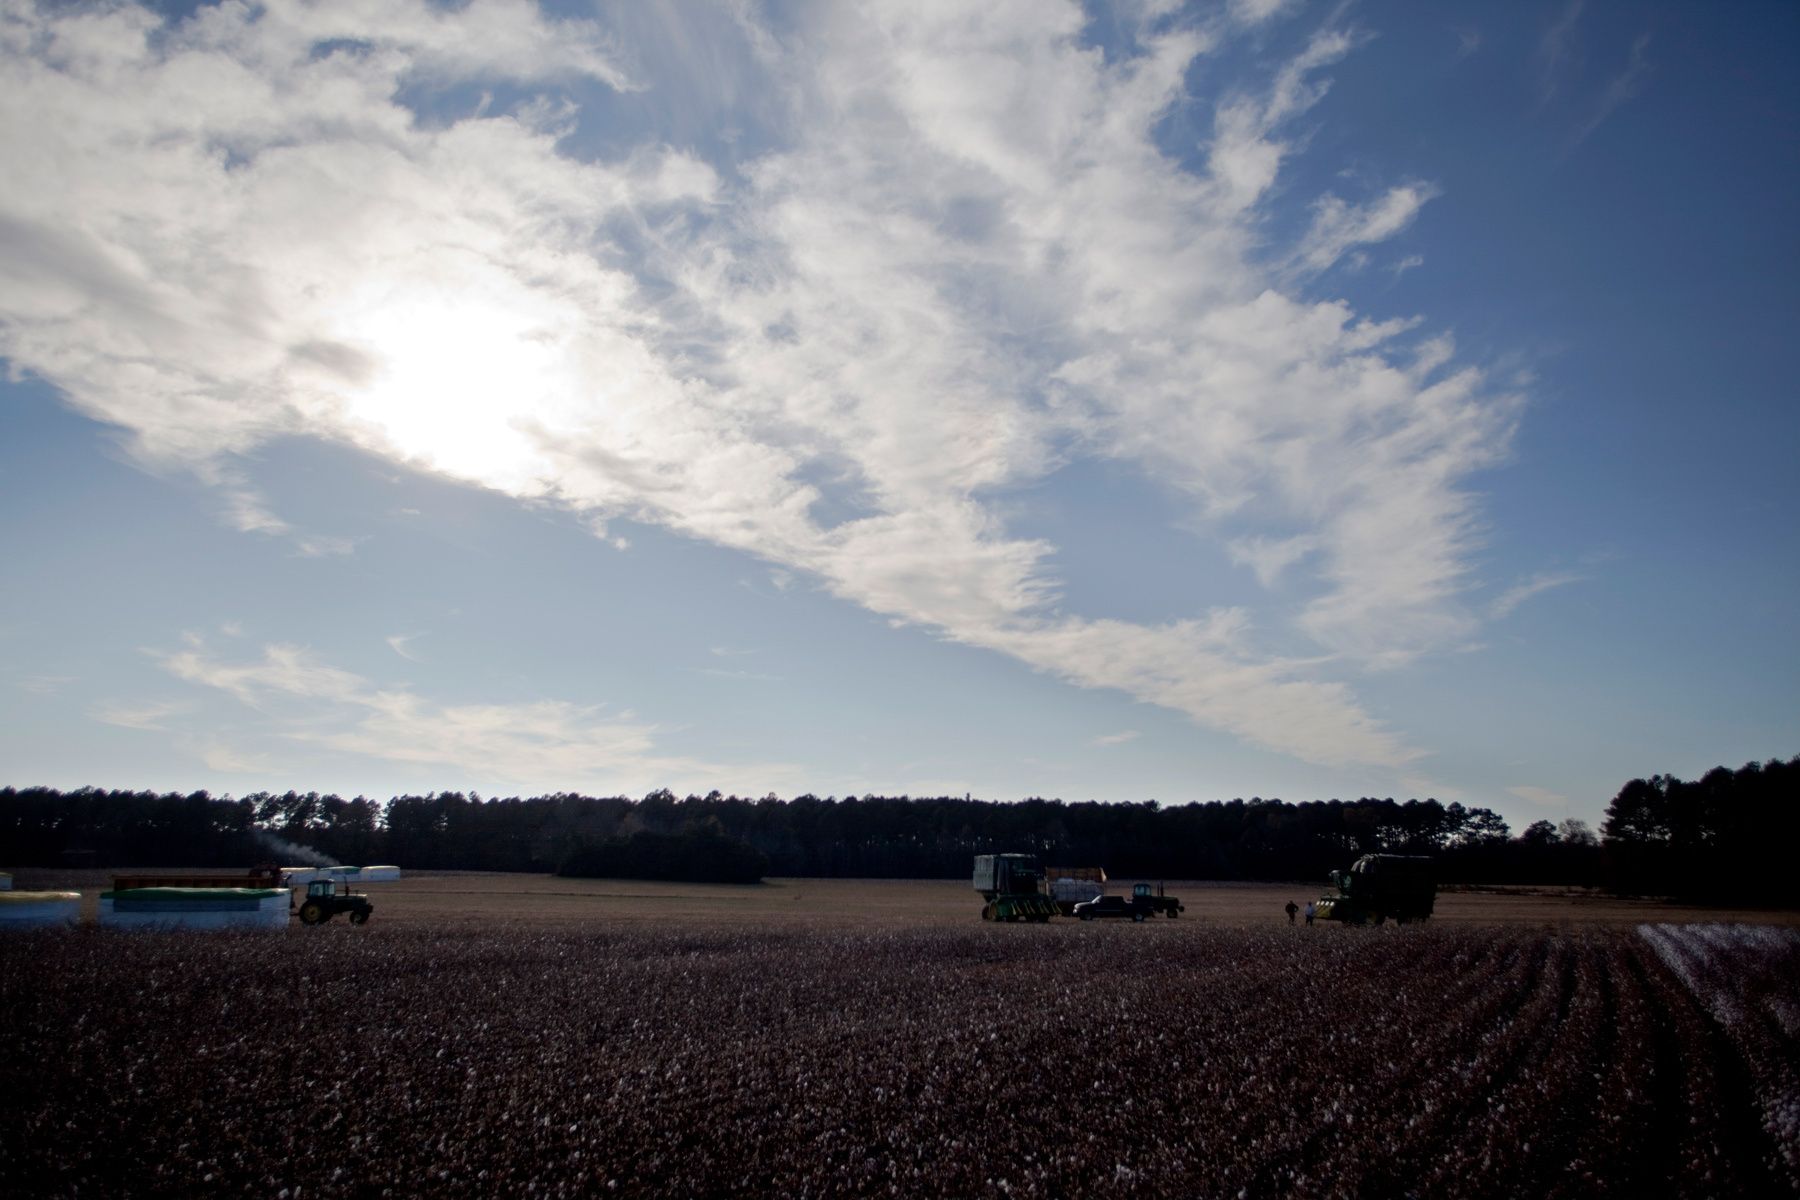 Cotton workers and their equipment are placed on the edge of a field for Baxley & Baxley Farms on a tract in Minturn, South Carolina November 24, 2012. The cotton harvest takes place in South Carolina from October through November and is planted and grows along a corridor approximately 30 miles on each side of Interstate I-95. About 80 percent of the cotton harvested by this farm is exported outside the United States. REUTERS/Randall Hill (UNITED STATES)